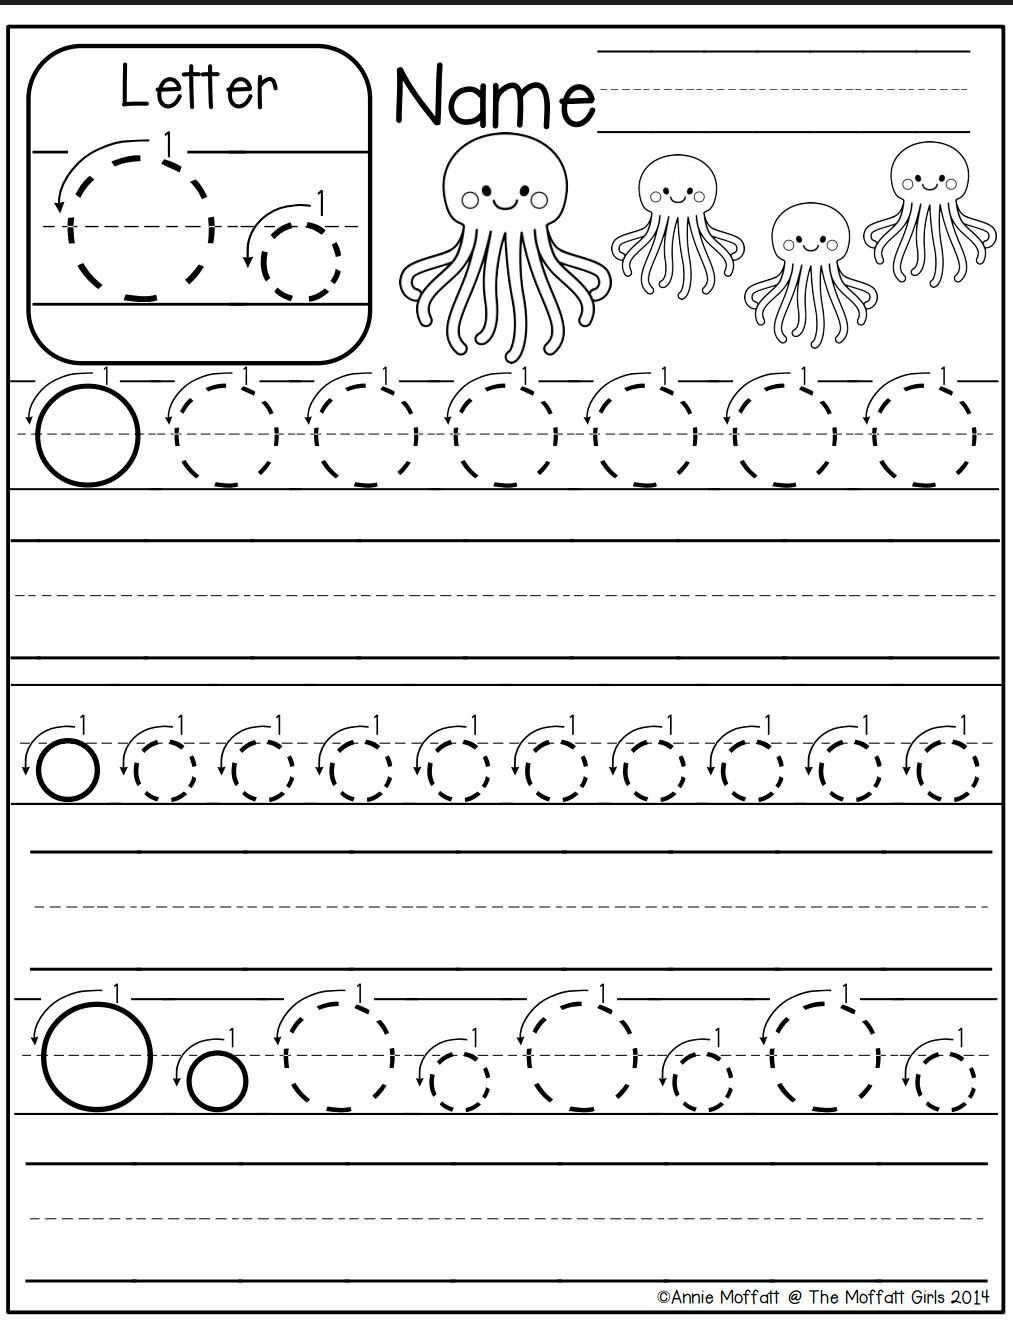 english-for-kids-step-by-step-letter-o-writing-practice-worksheet